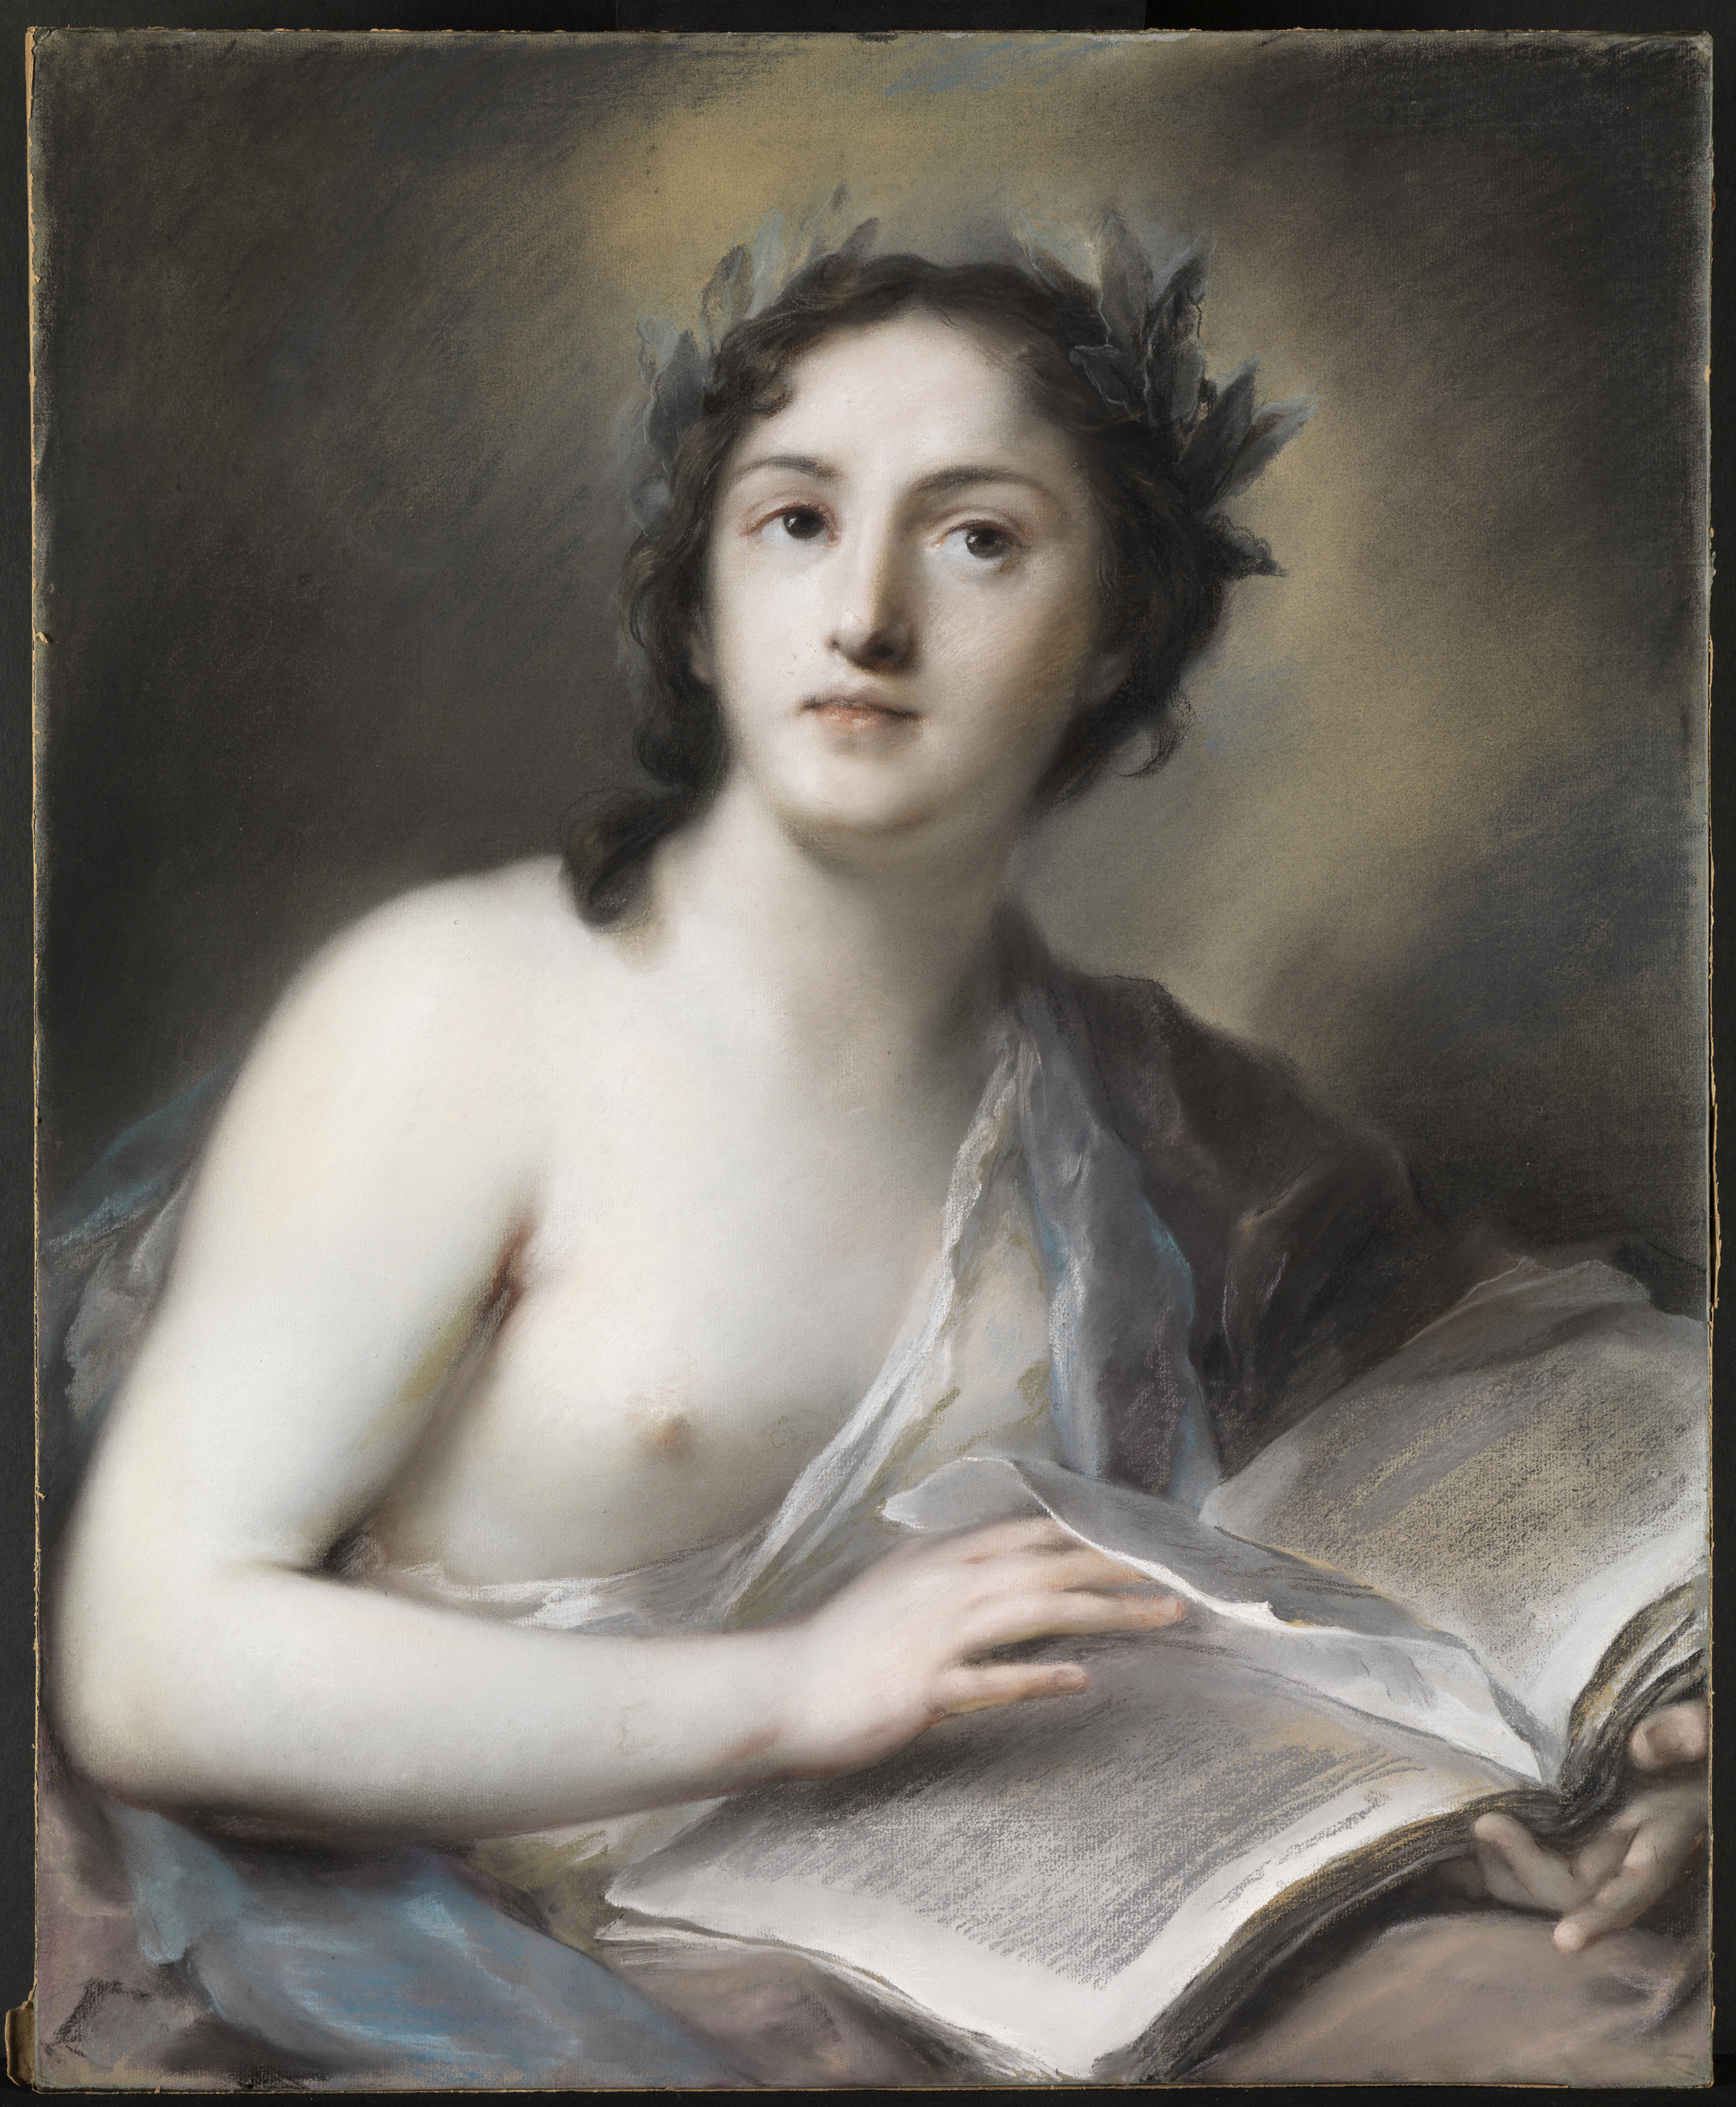 A classicized portrait of a young woman, cropped at half-length, seated in front of a dreamy, cloud-like background. She holds a book in her lap and looks up towards the sky. She wears a laurel crown and diaphanous grown, with one breast bared.